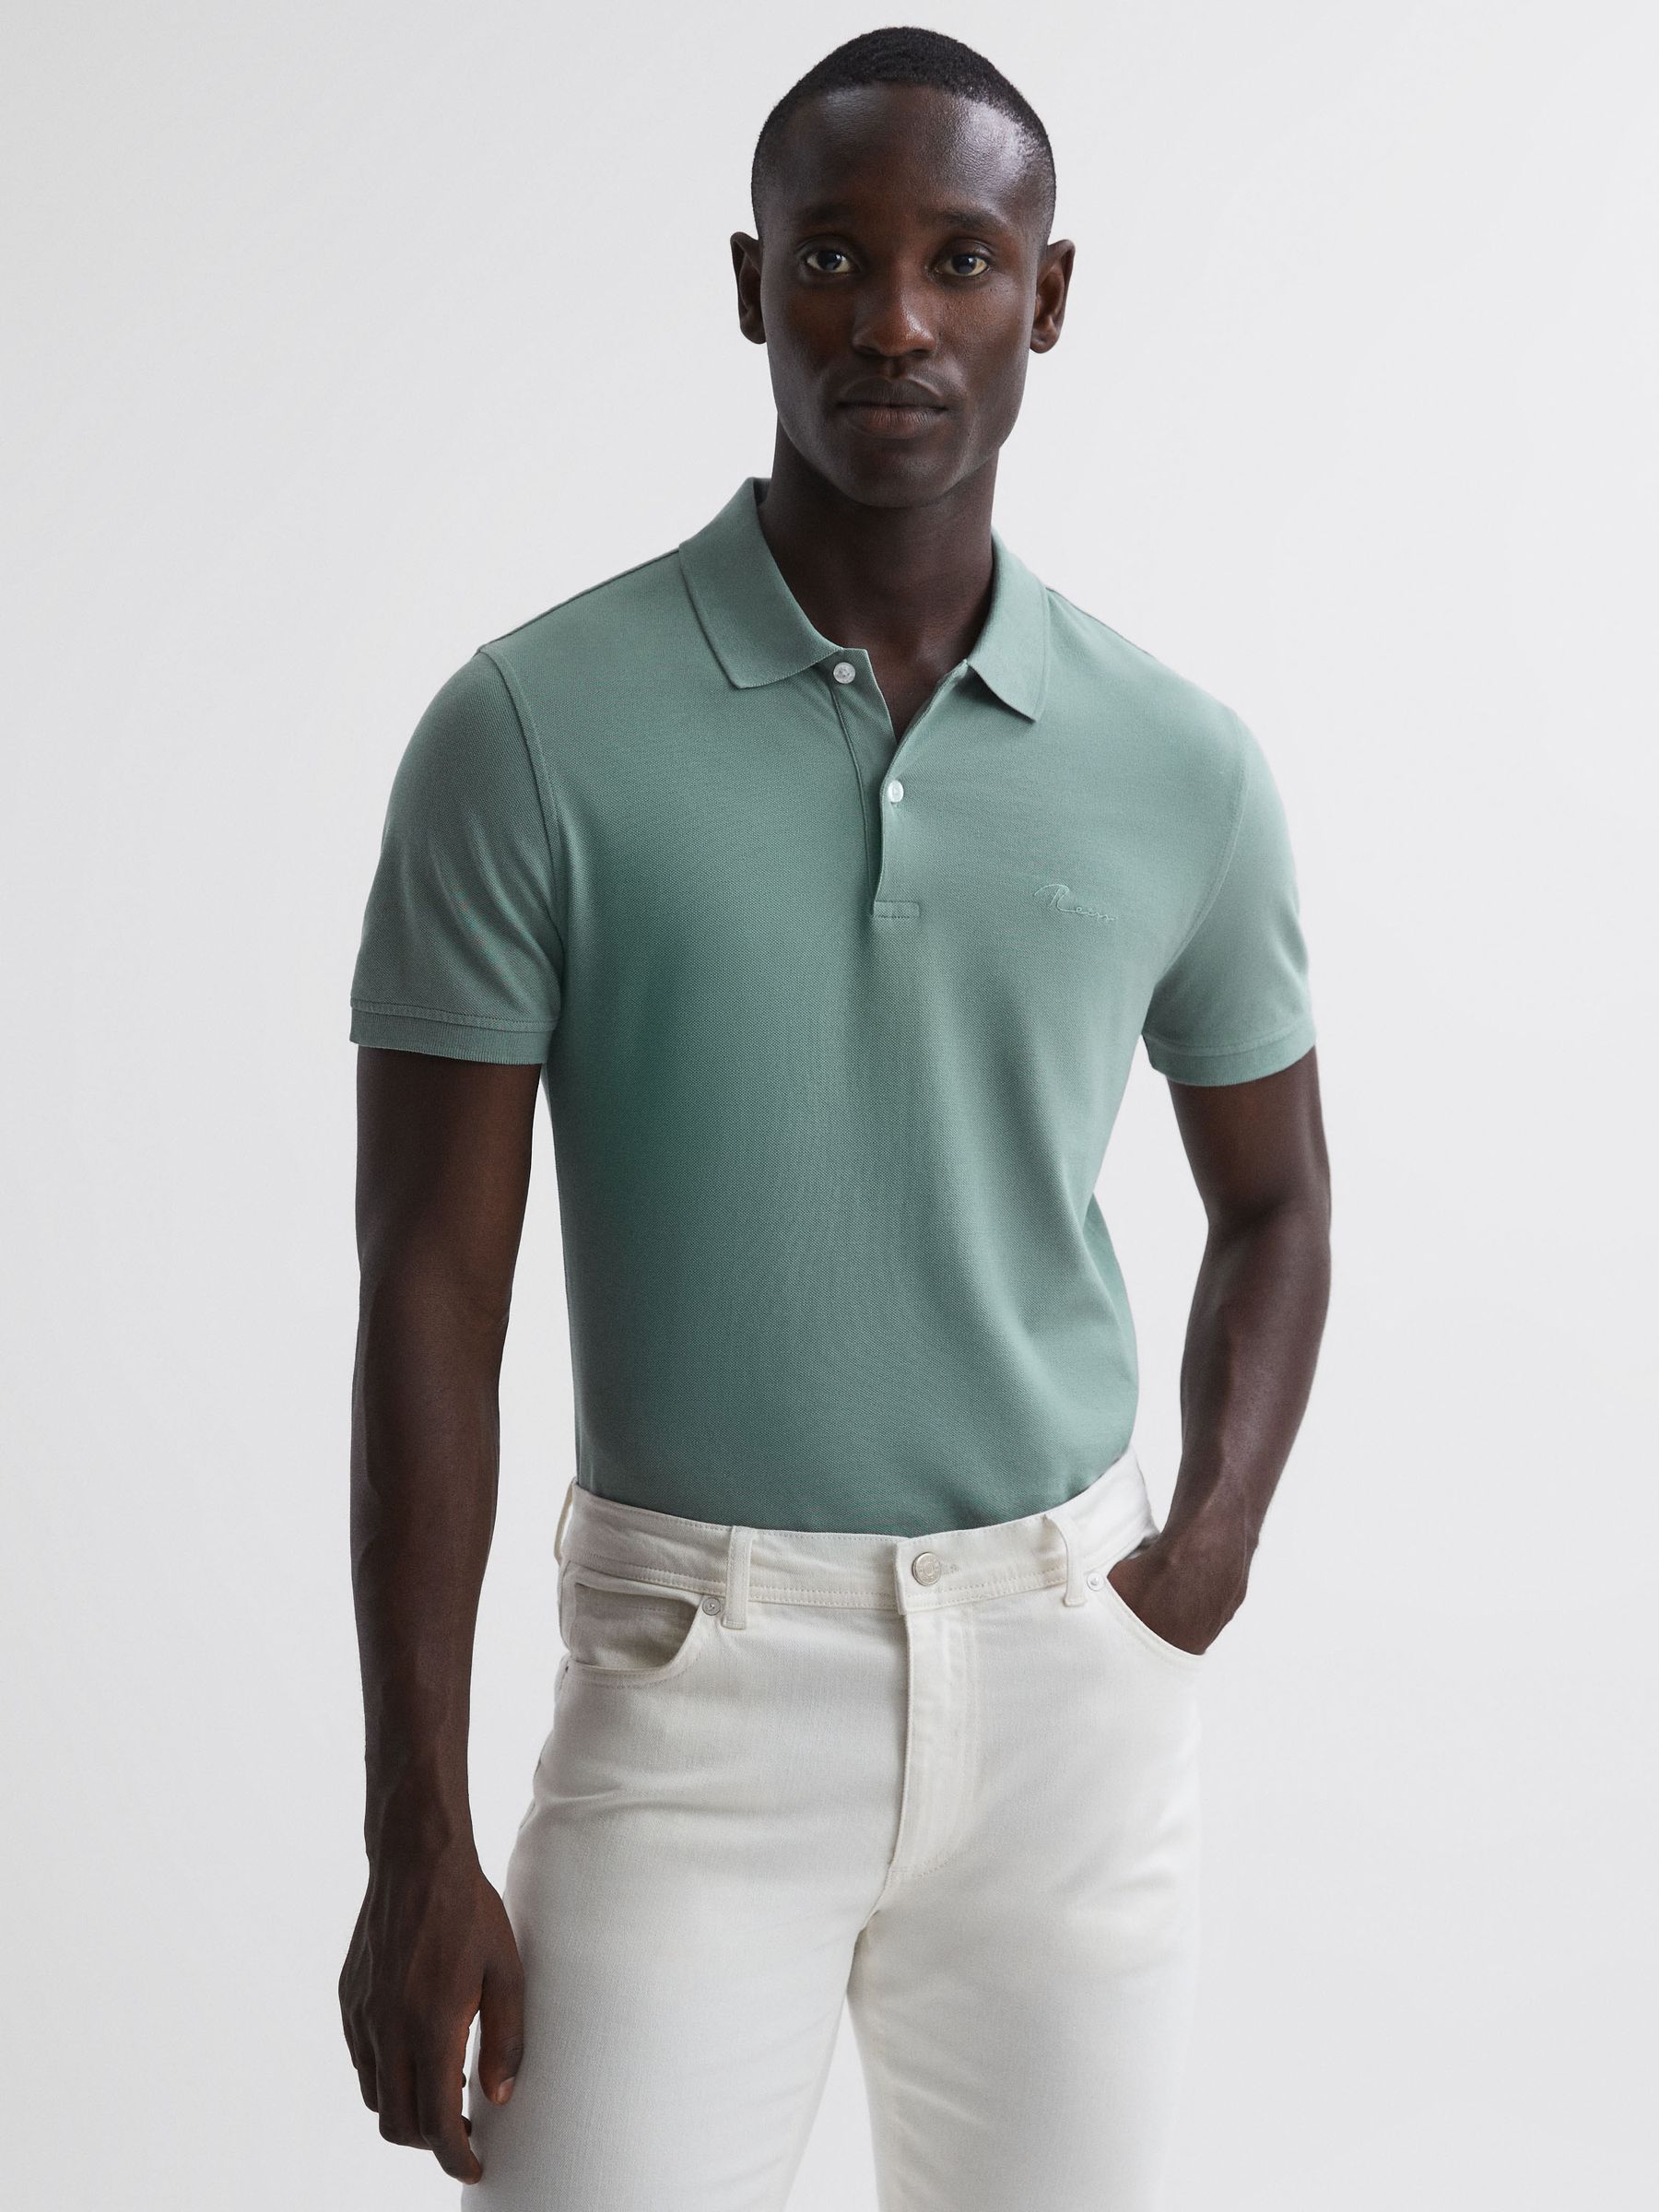 Reiss Peters Slim Fit Garment Dyed Polo Shirt | REISS USA